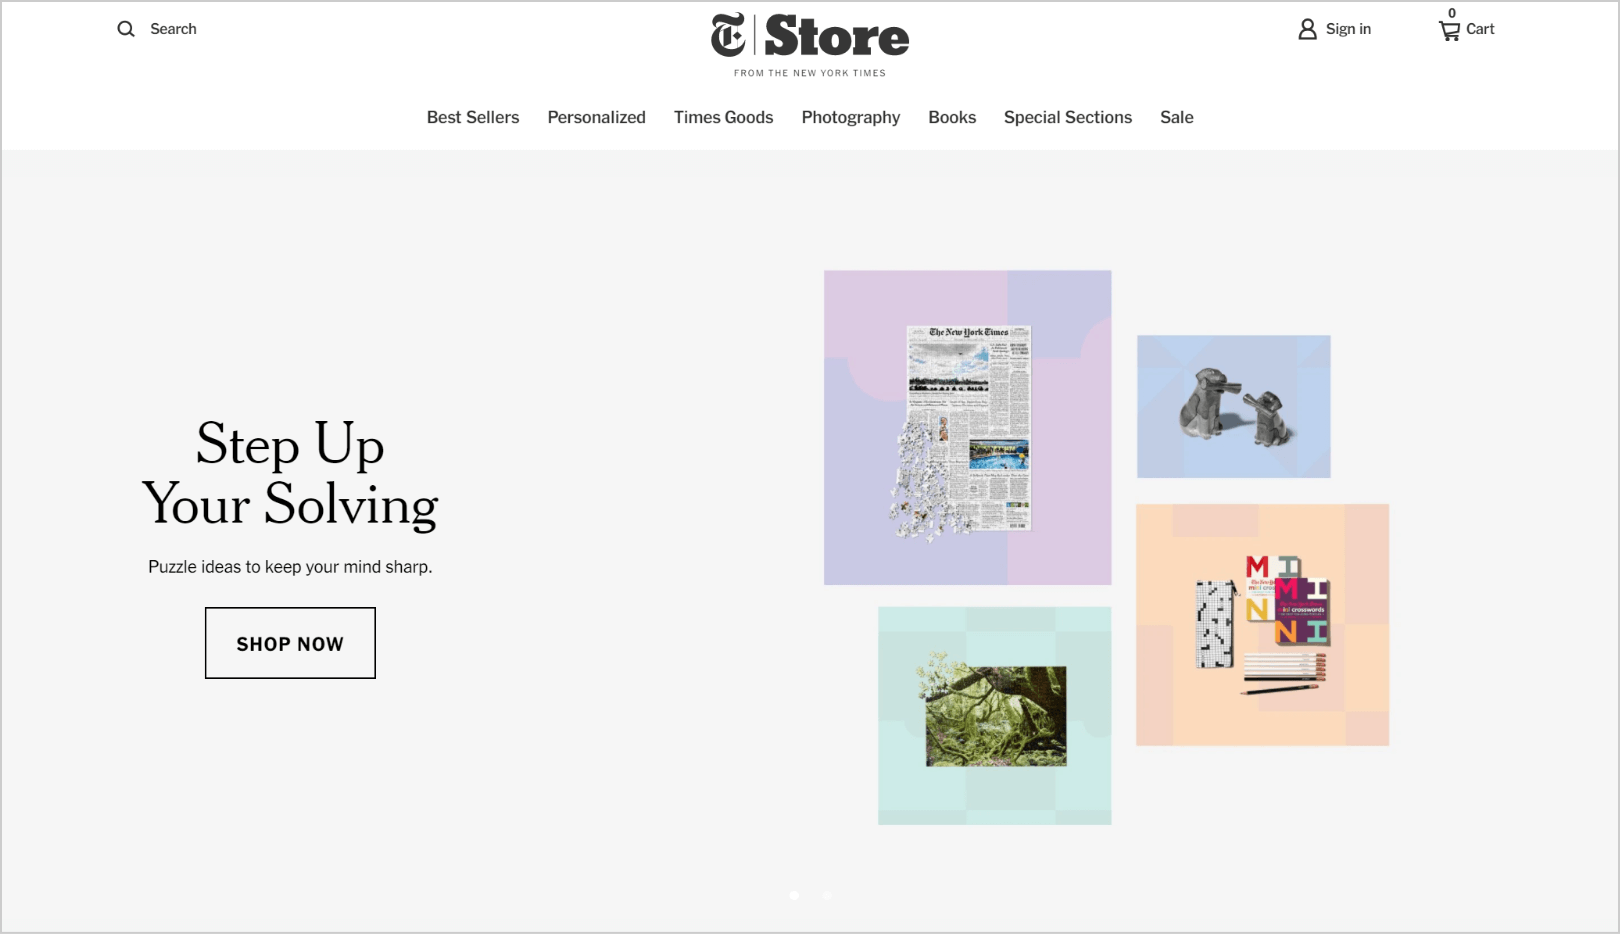 Le-New-York-Times-eCommerce